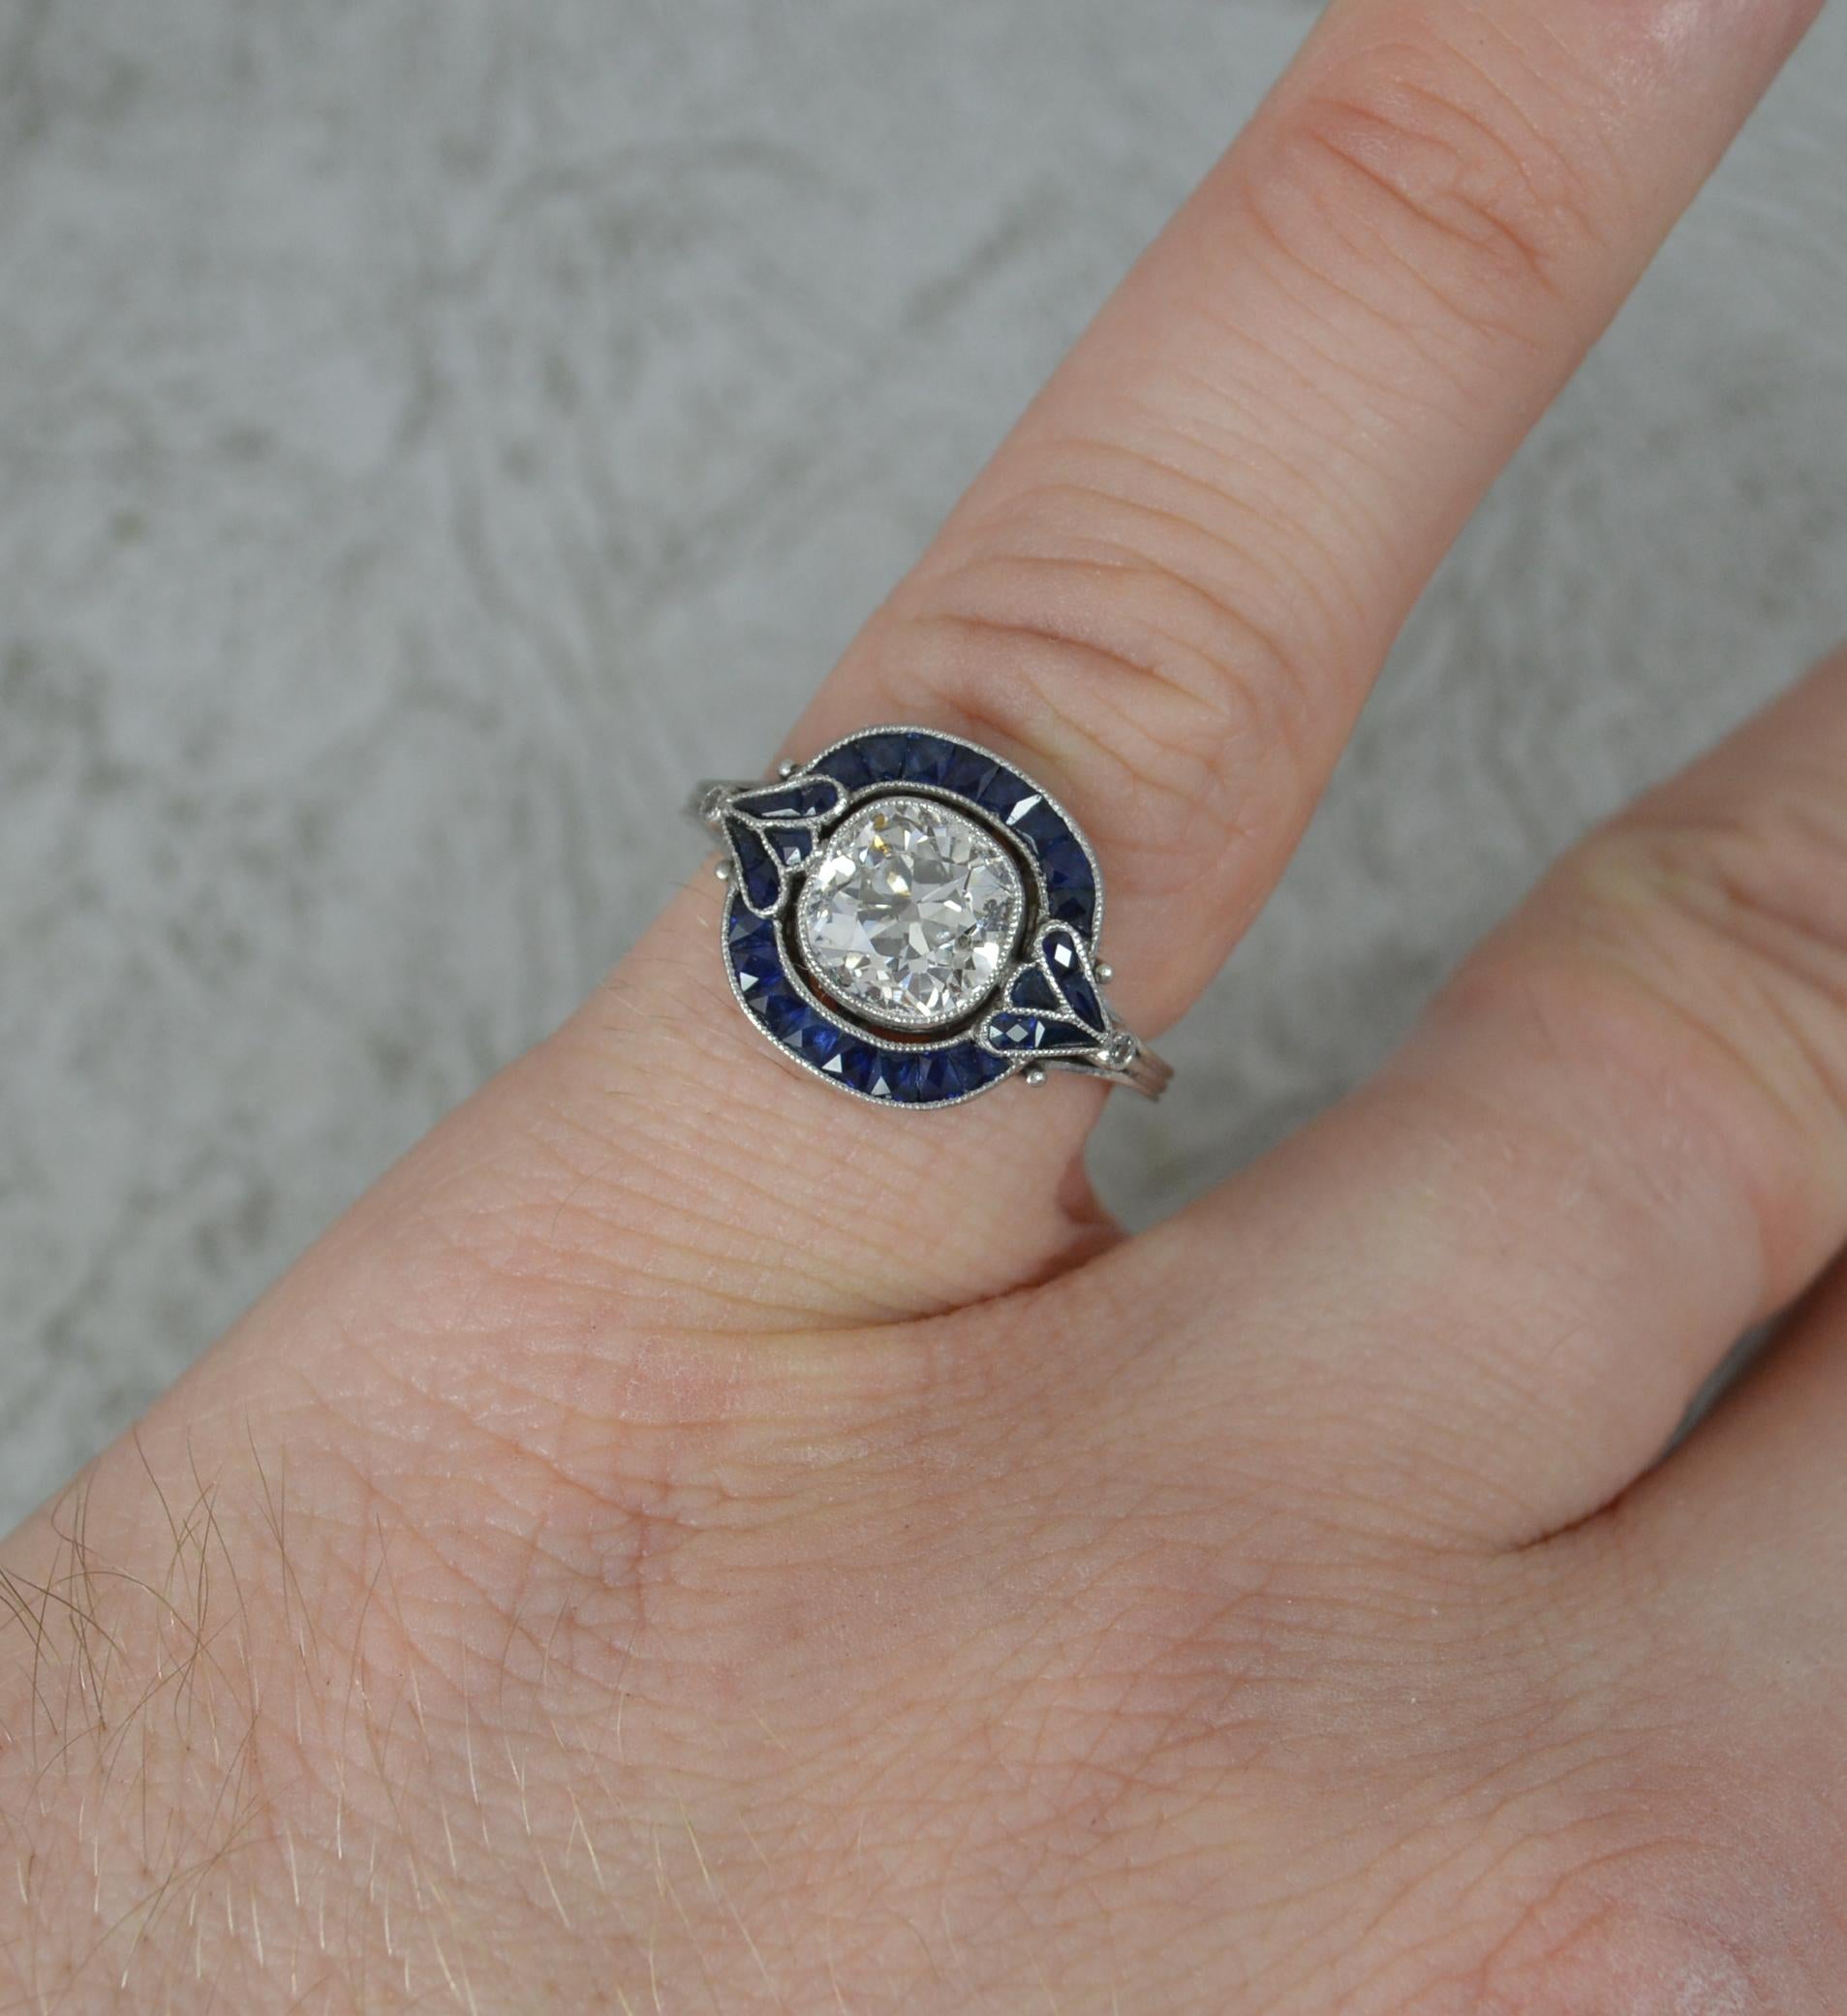 A superb diamond and sapphire target halo engagement ring.
Solid 950 grade platinum shank.
Designed with a 2.00 old mine cut diamond to centre in full grain, bezel setting. I1 clarity, J colour. Bright and sparky. Surrounding are varying size and of